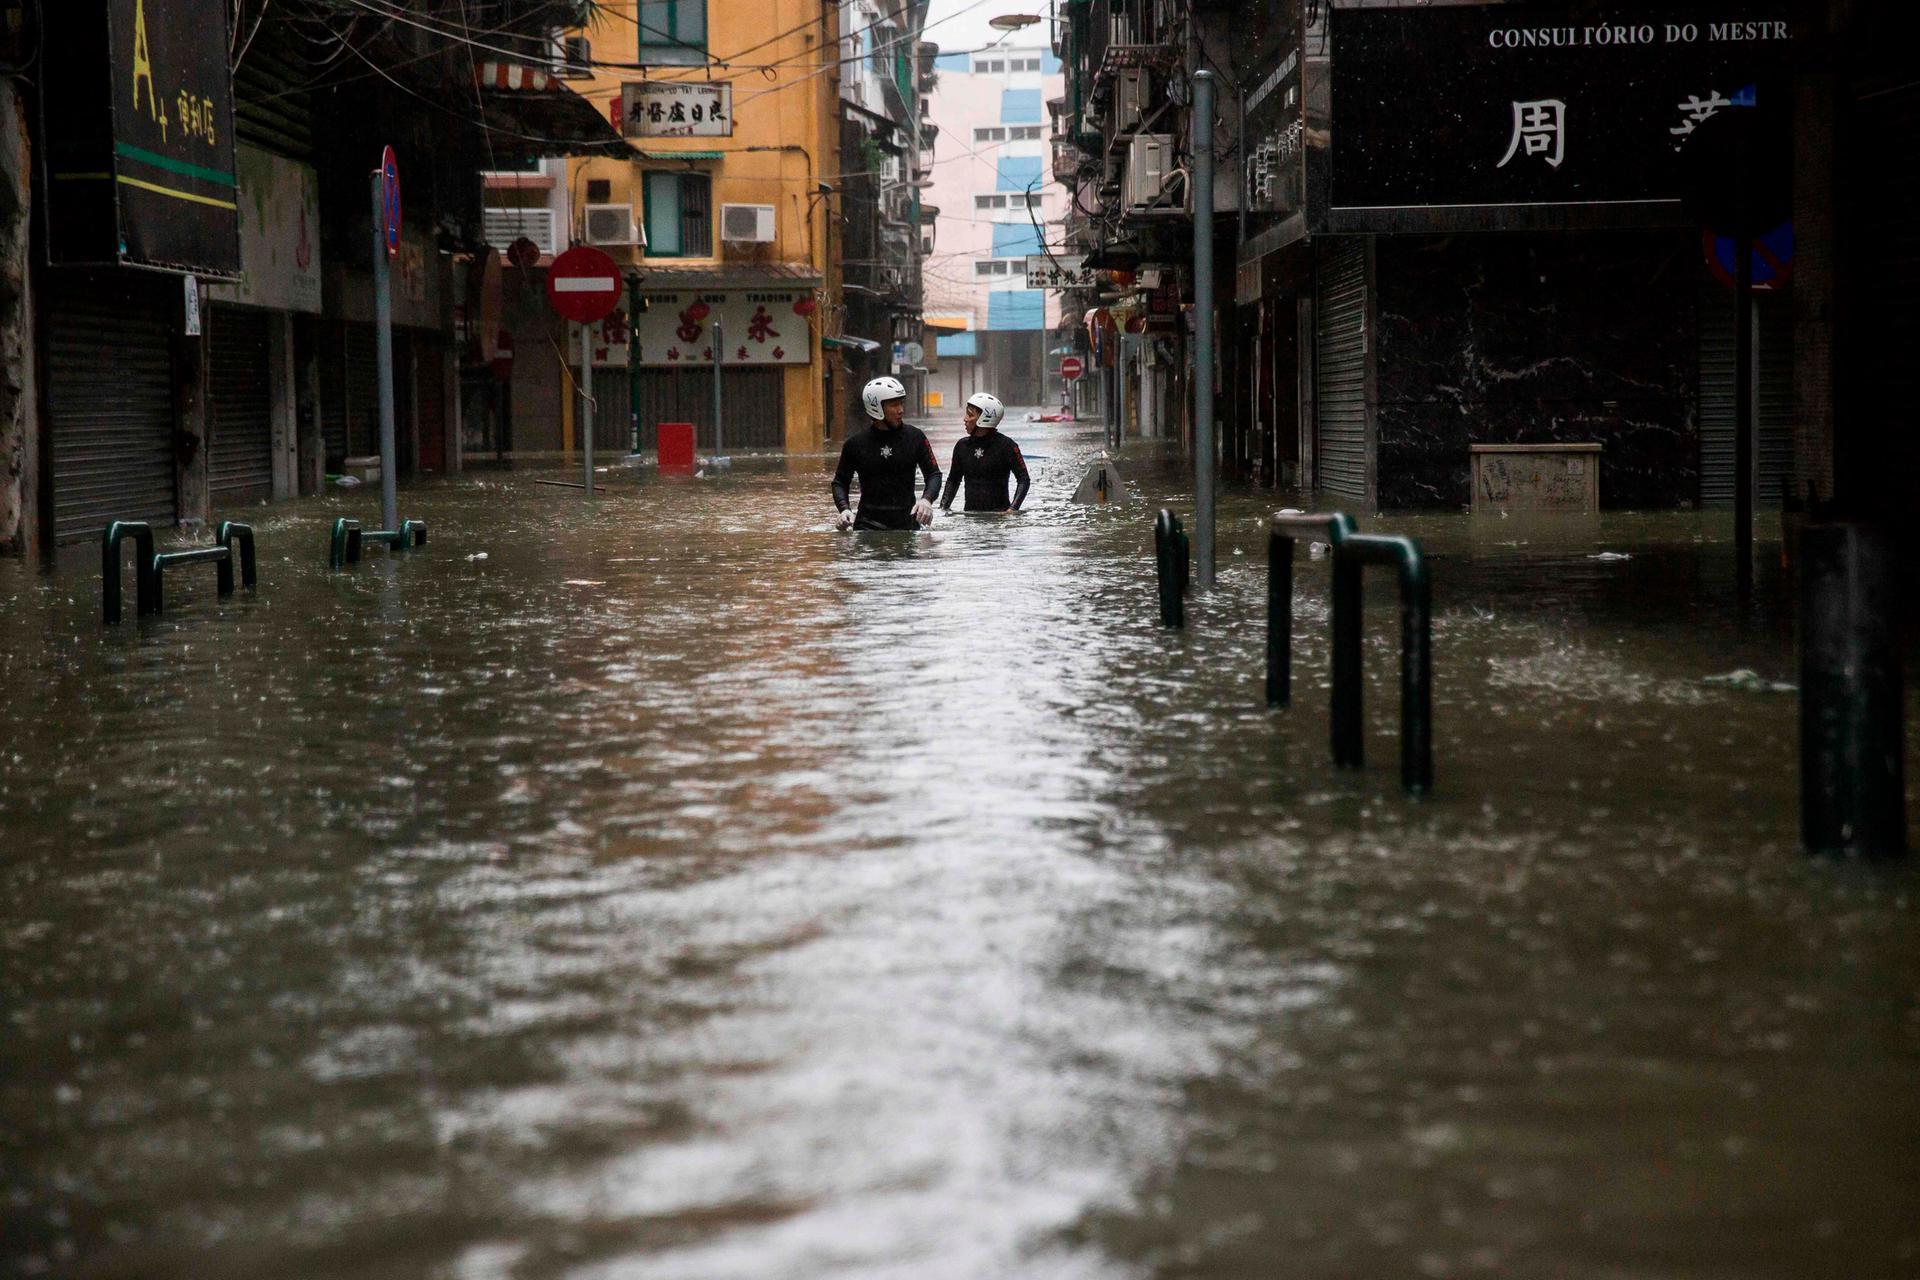 Rescue workers make their way through floodwaters during a rescue operation in Macau. AFP